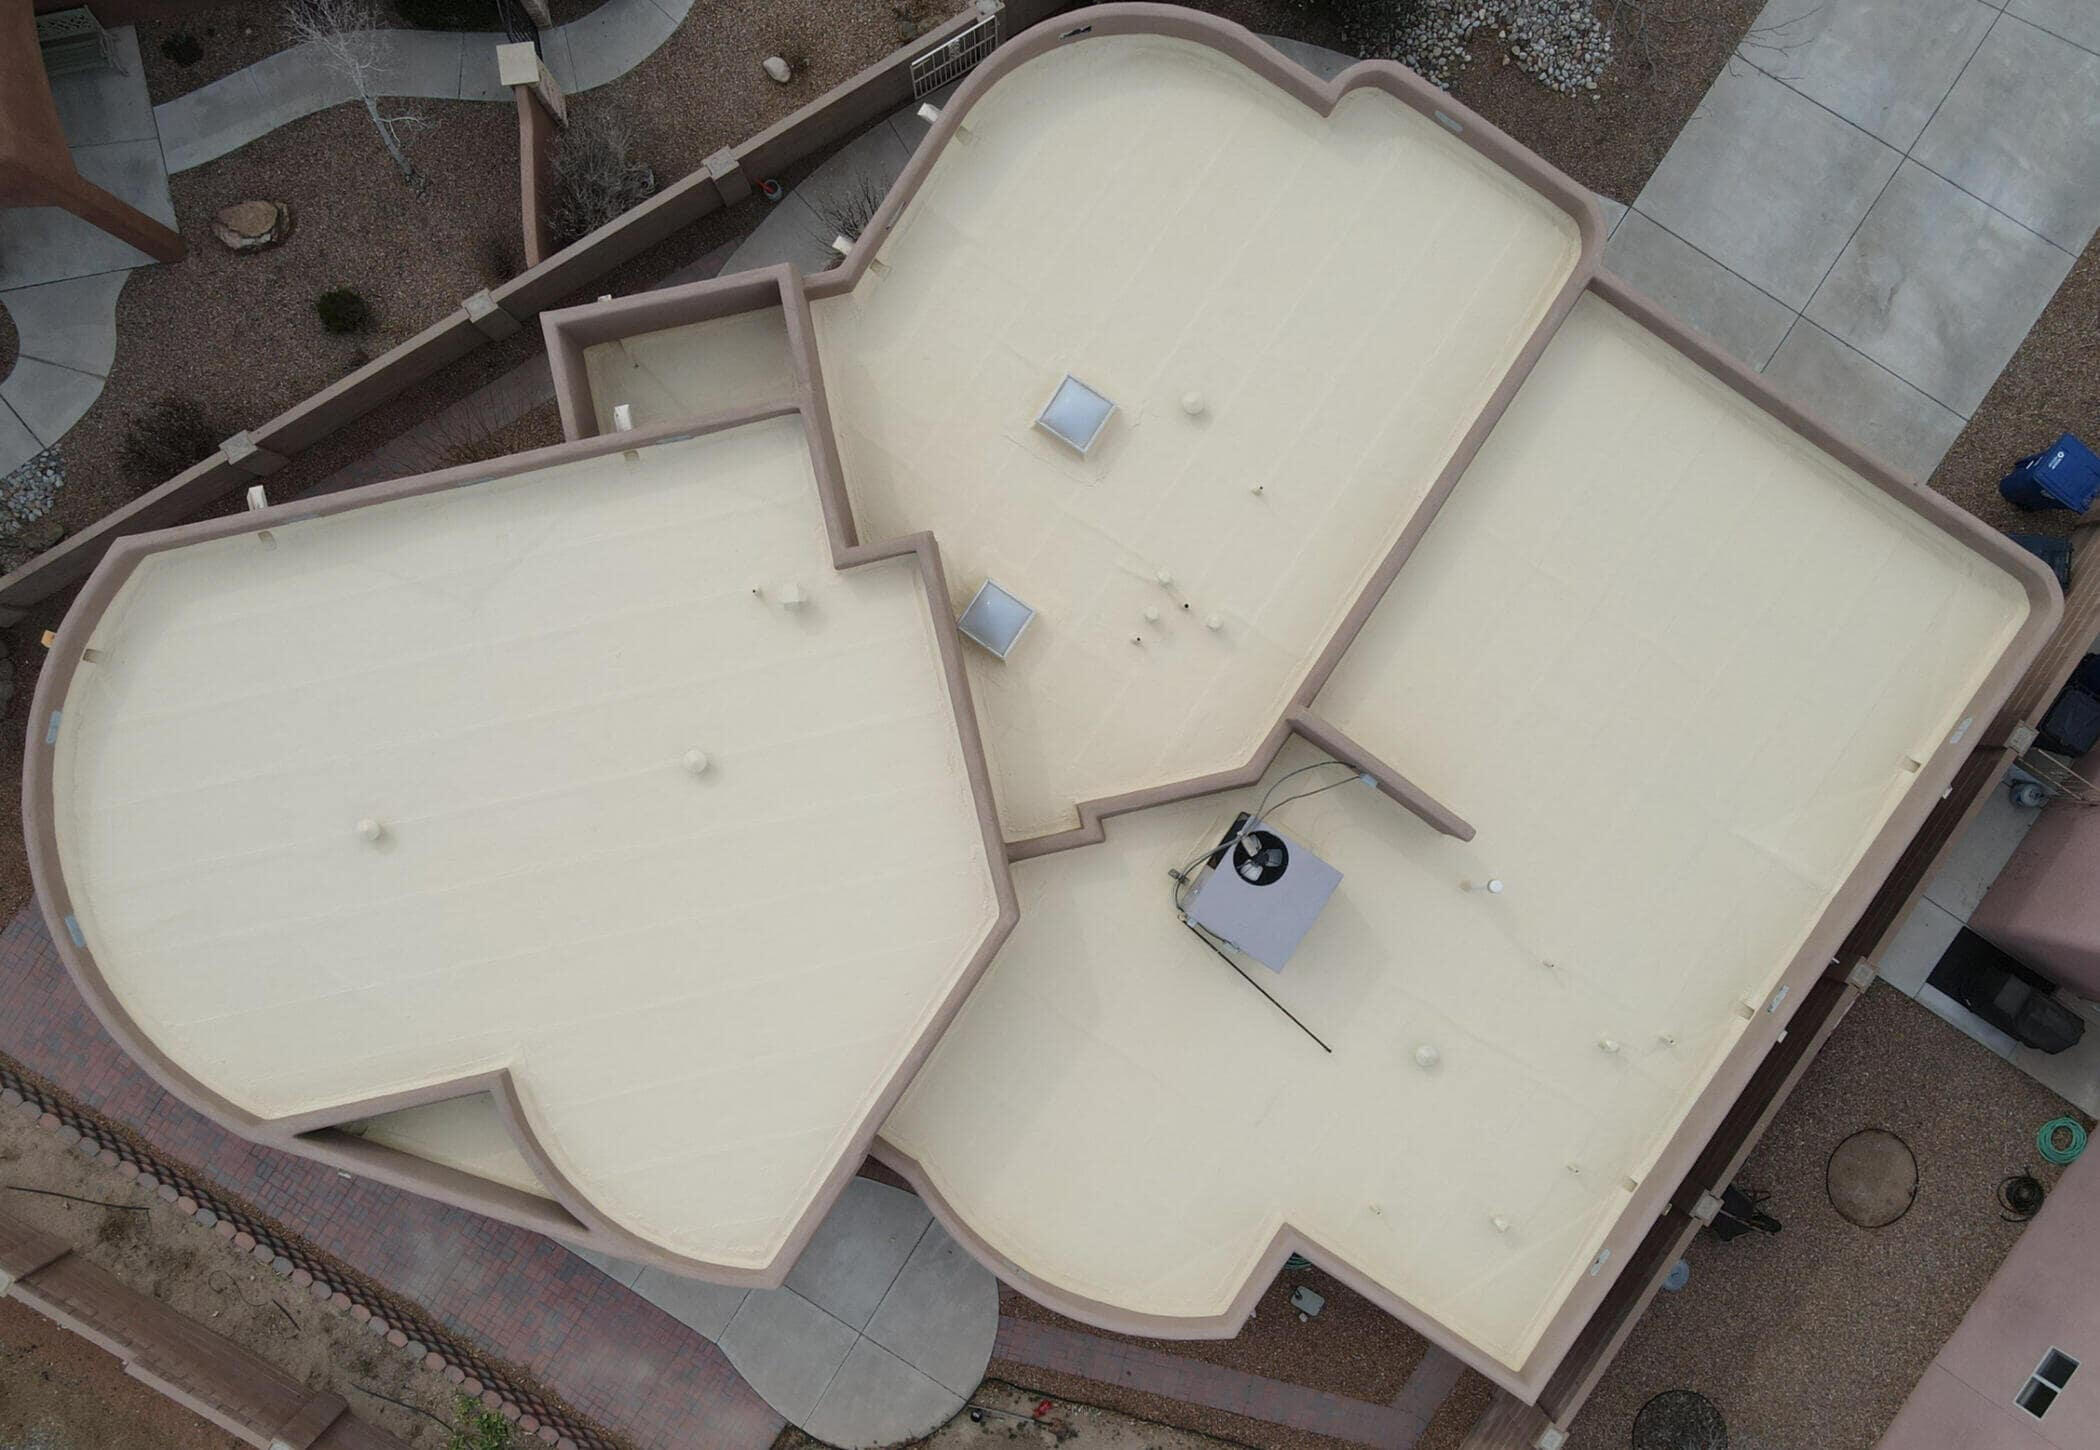 Drone shot from above showcasing a newly applied tan silicone roof coating on a flat residential roof in Albuquerque, featuring skylights.